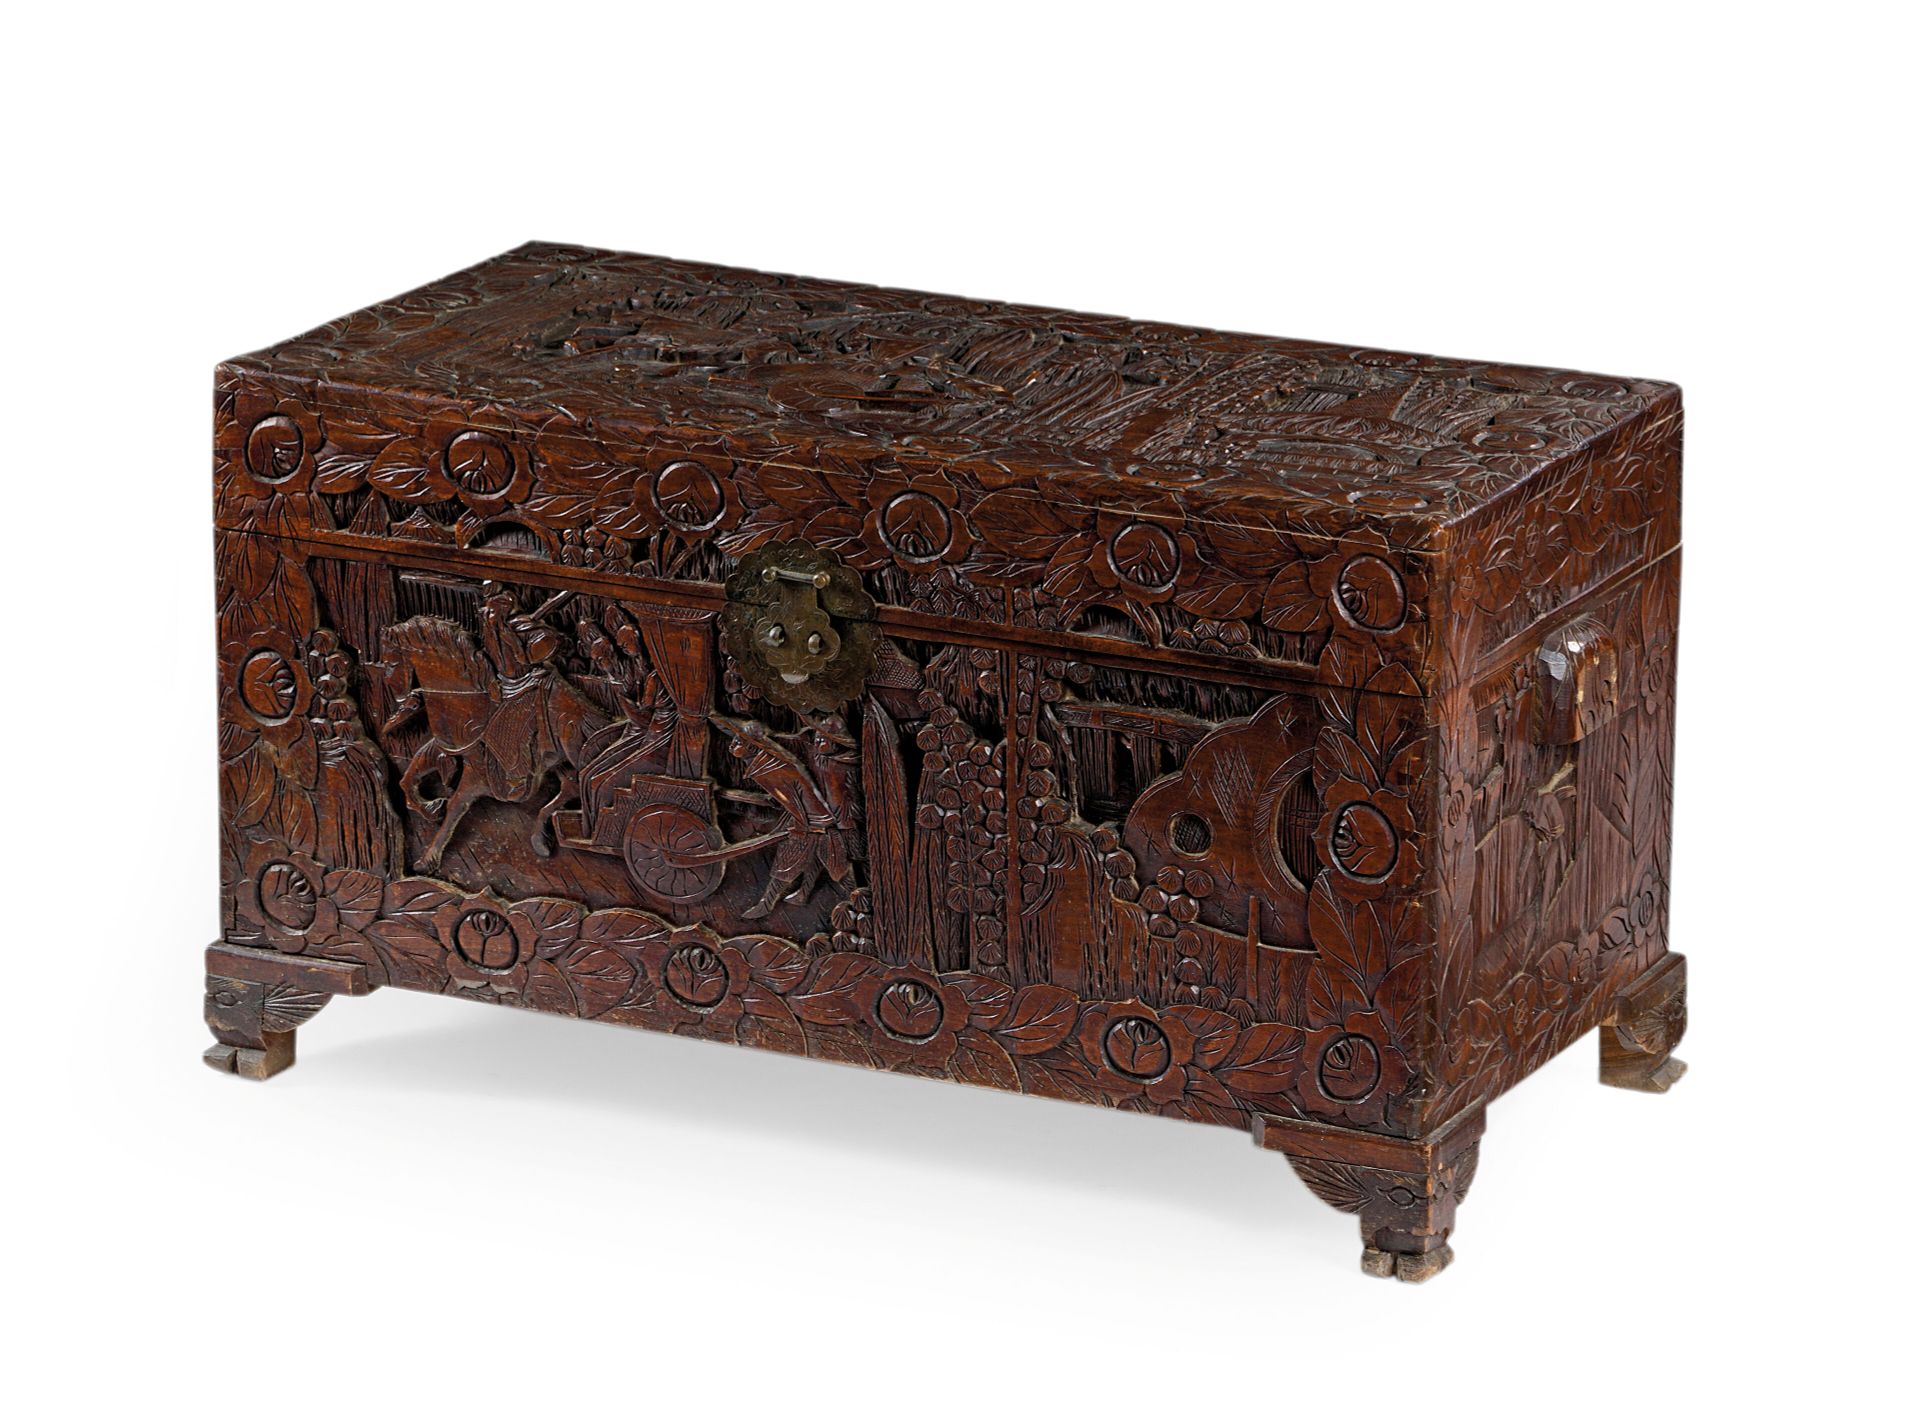 Null INDOCHINA - Circa 1900
Large rectangular wooden chest with richly carved de&hellip;